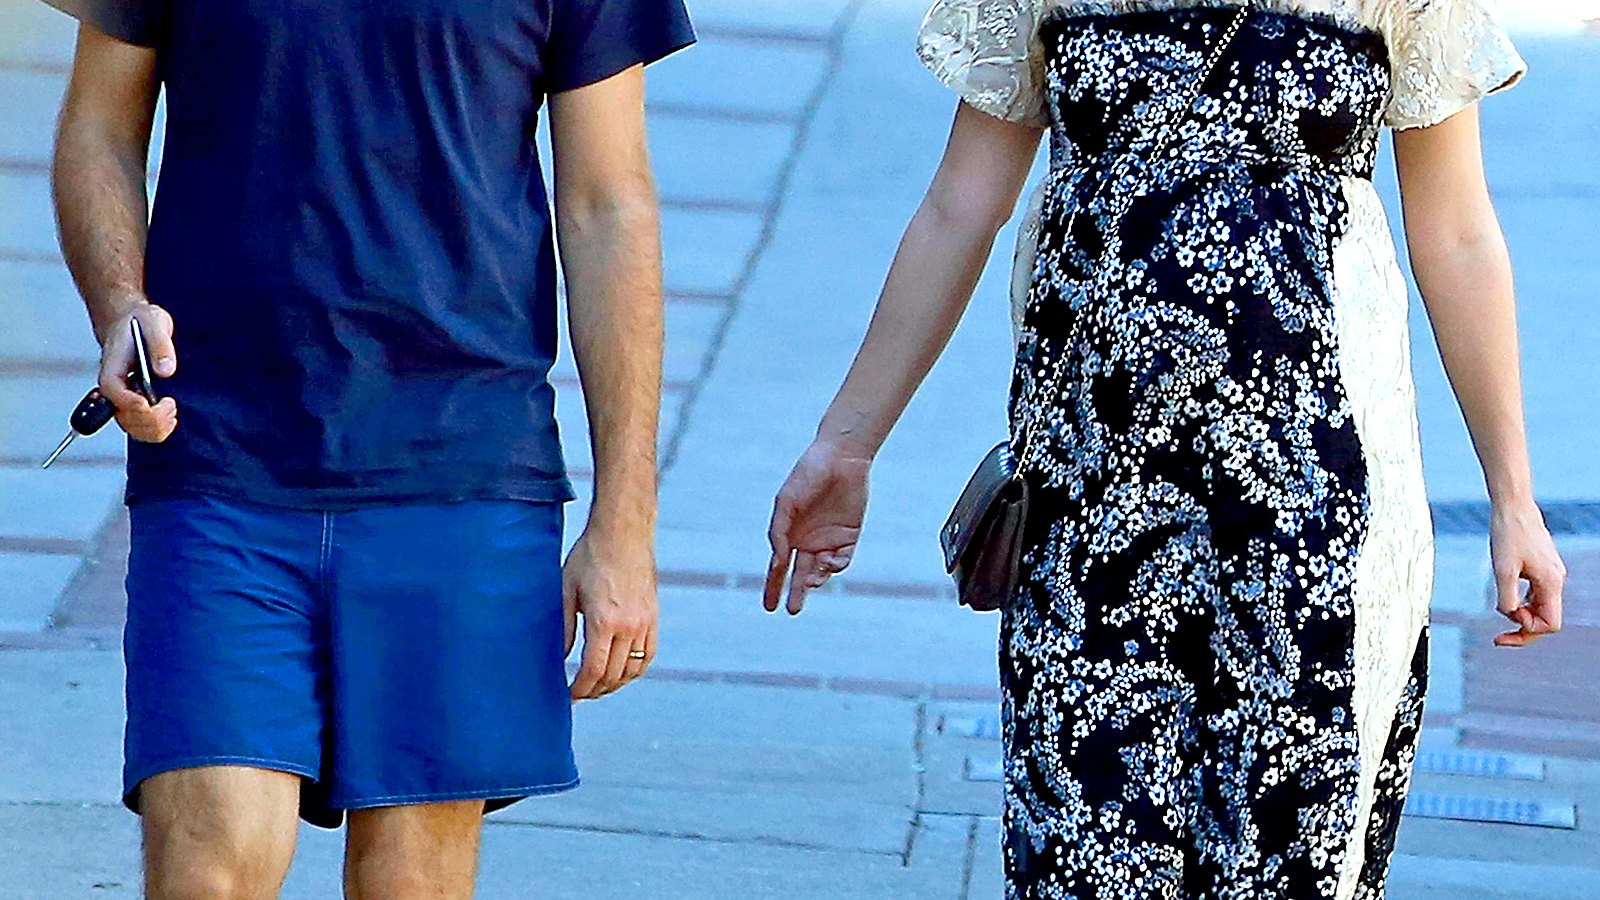 James Righton and Keira Knightley have lunch on Feb. 17, 2015.